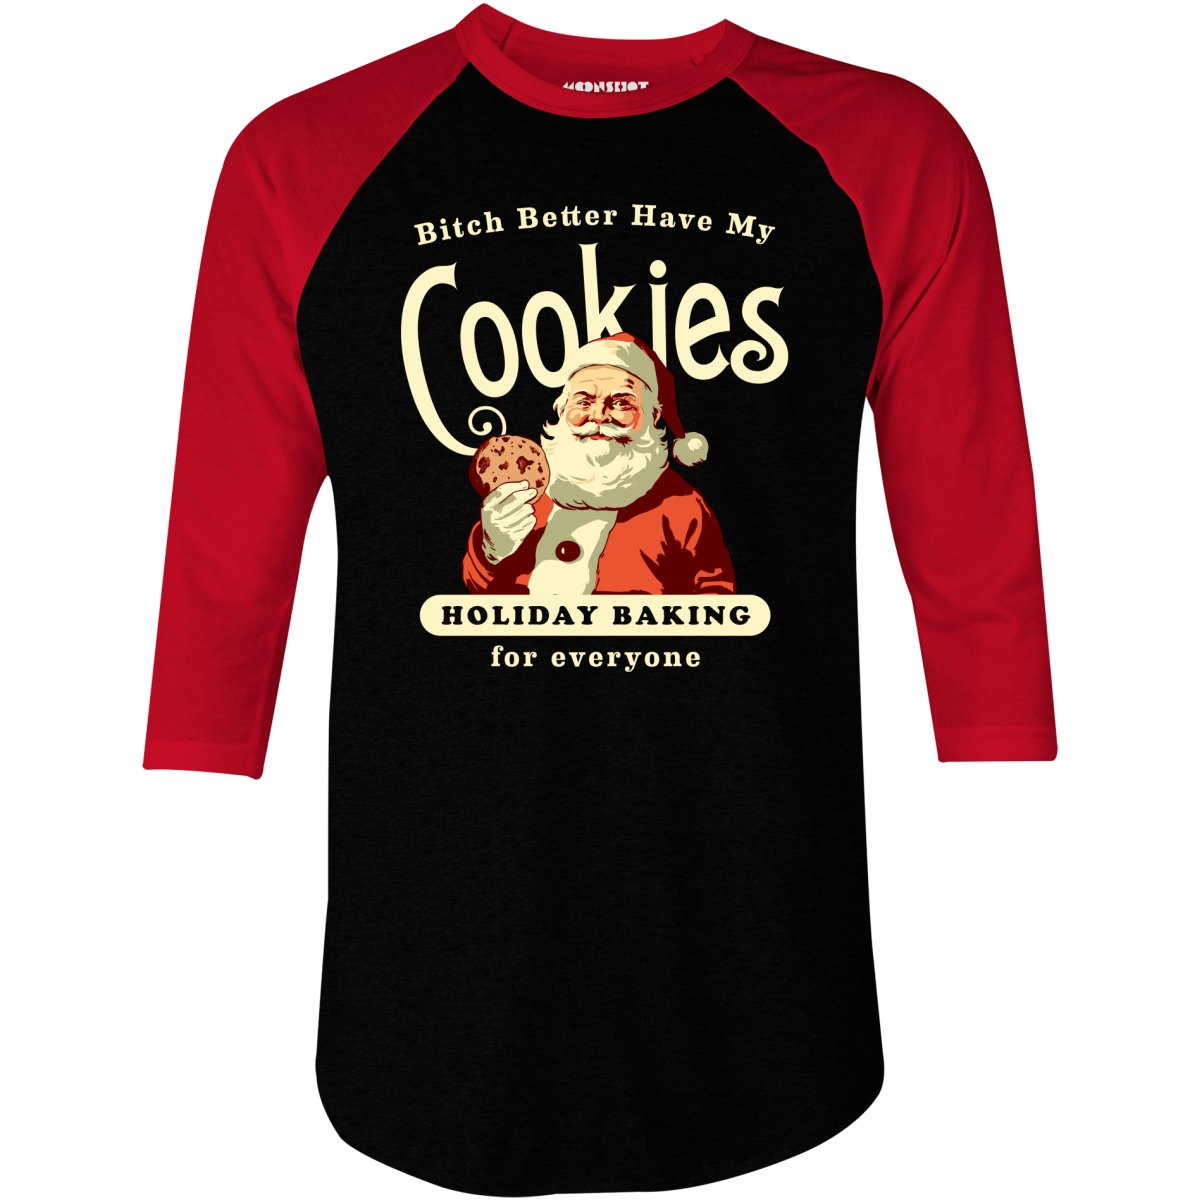 Bitch Better Have My Cookies Holiday Baking - 3/4 Sleeve Raglan T-Shirt